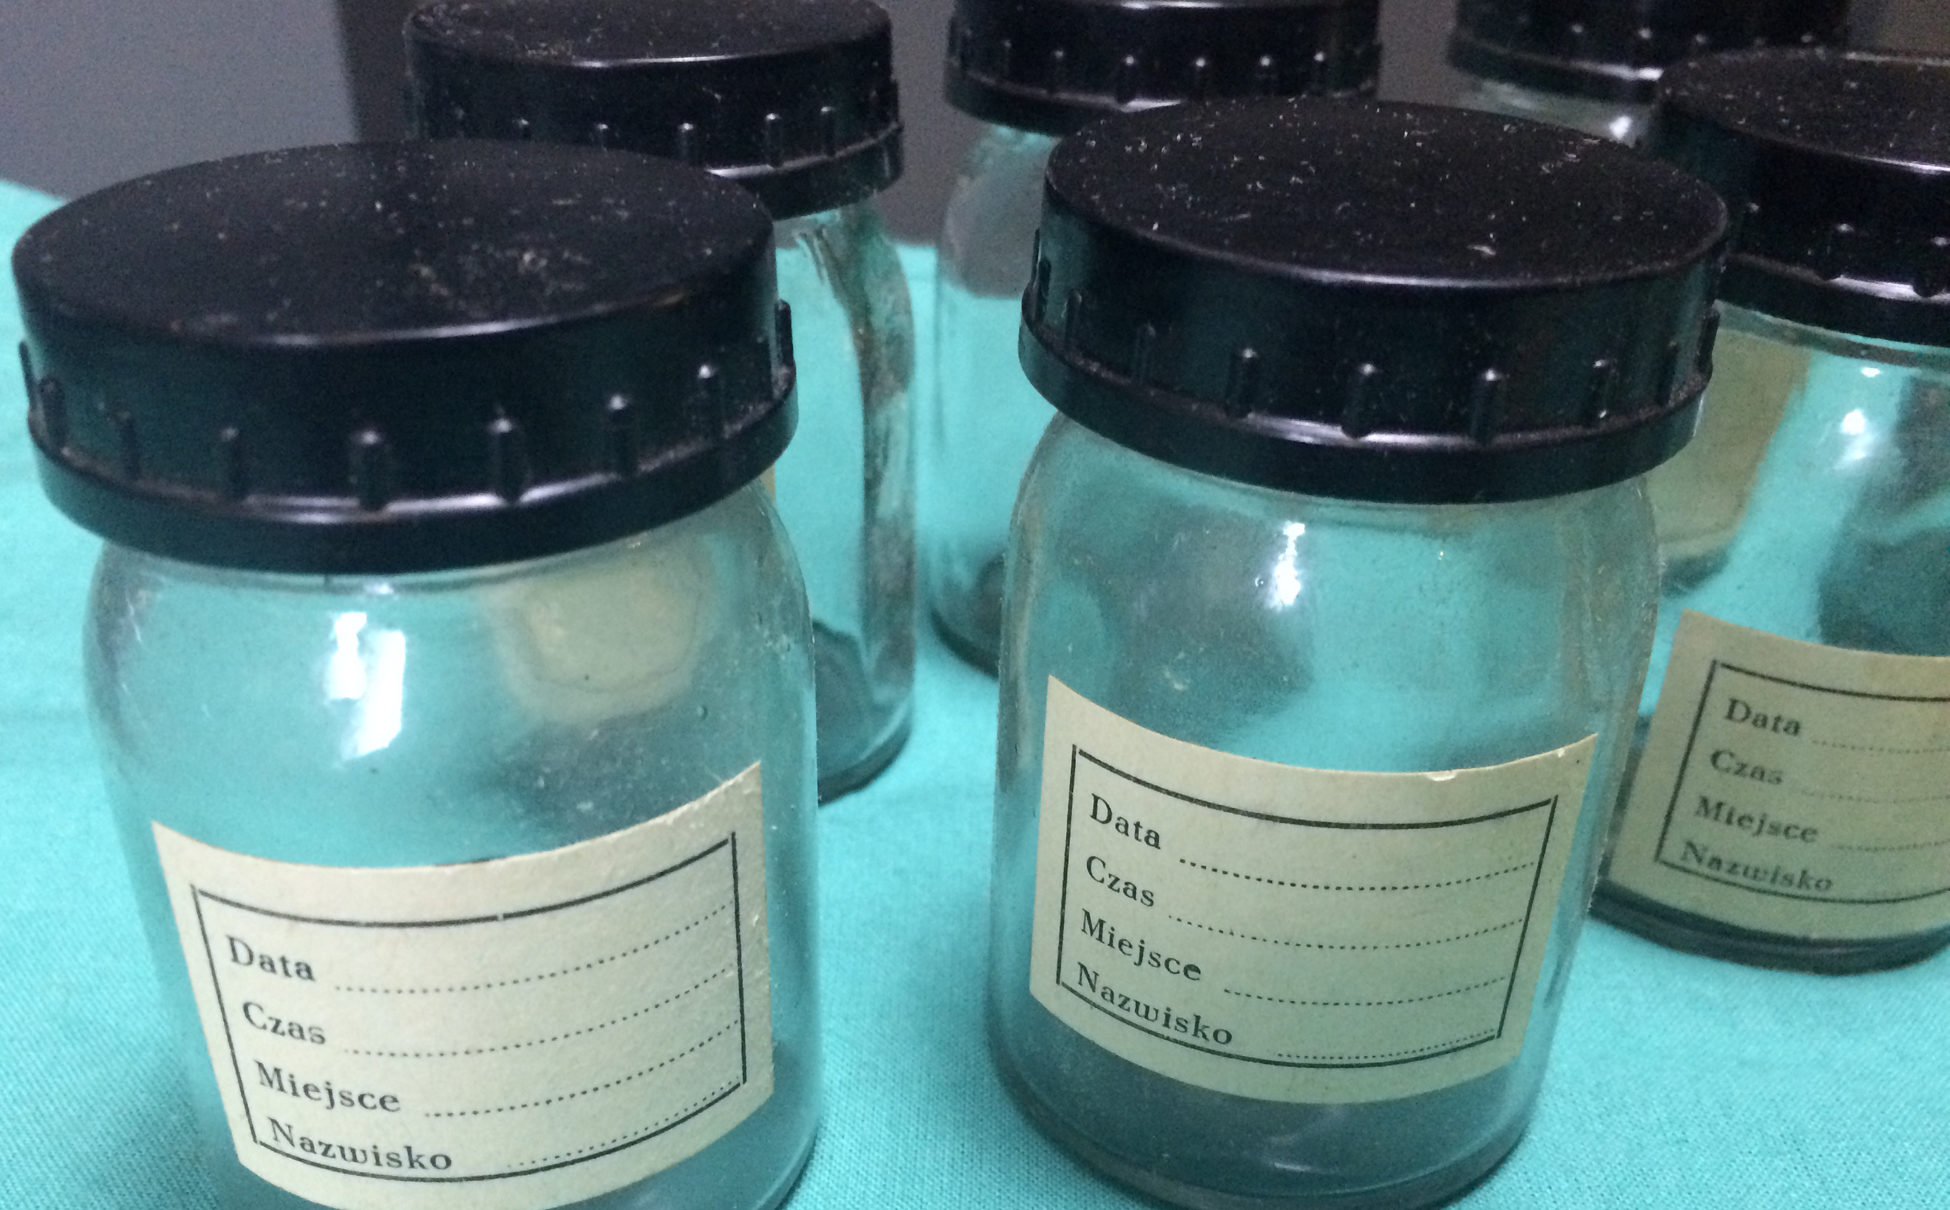 medical research council bottles